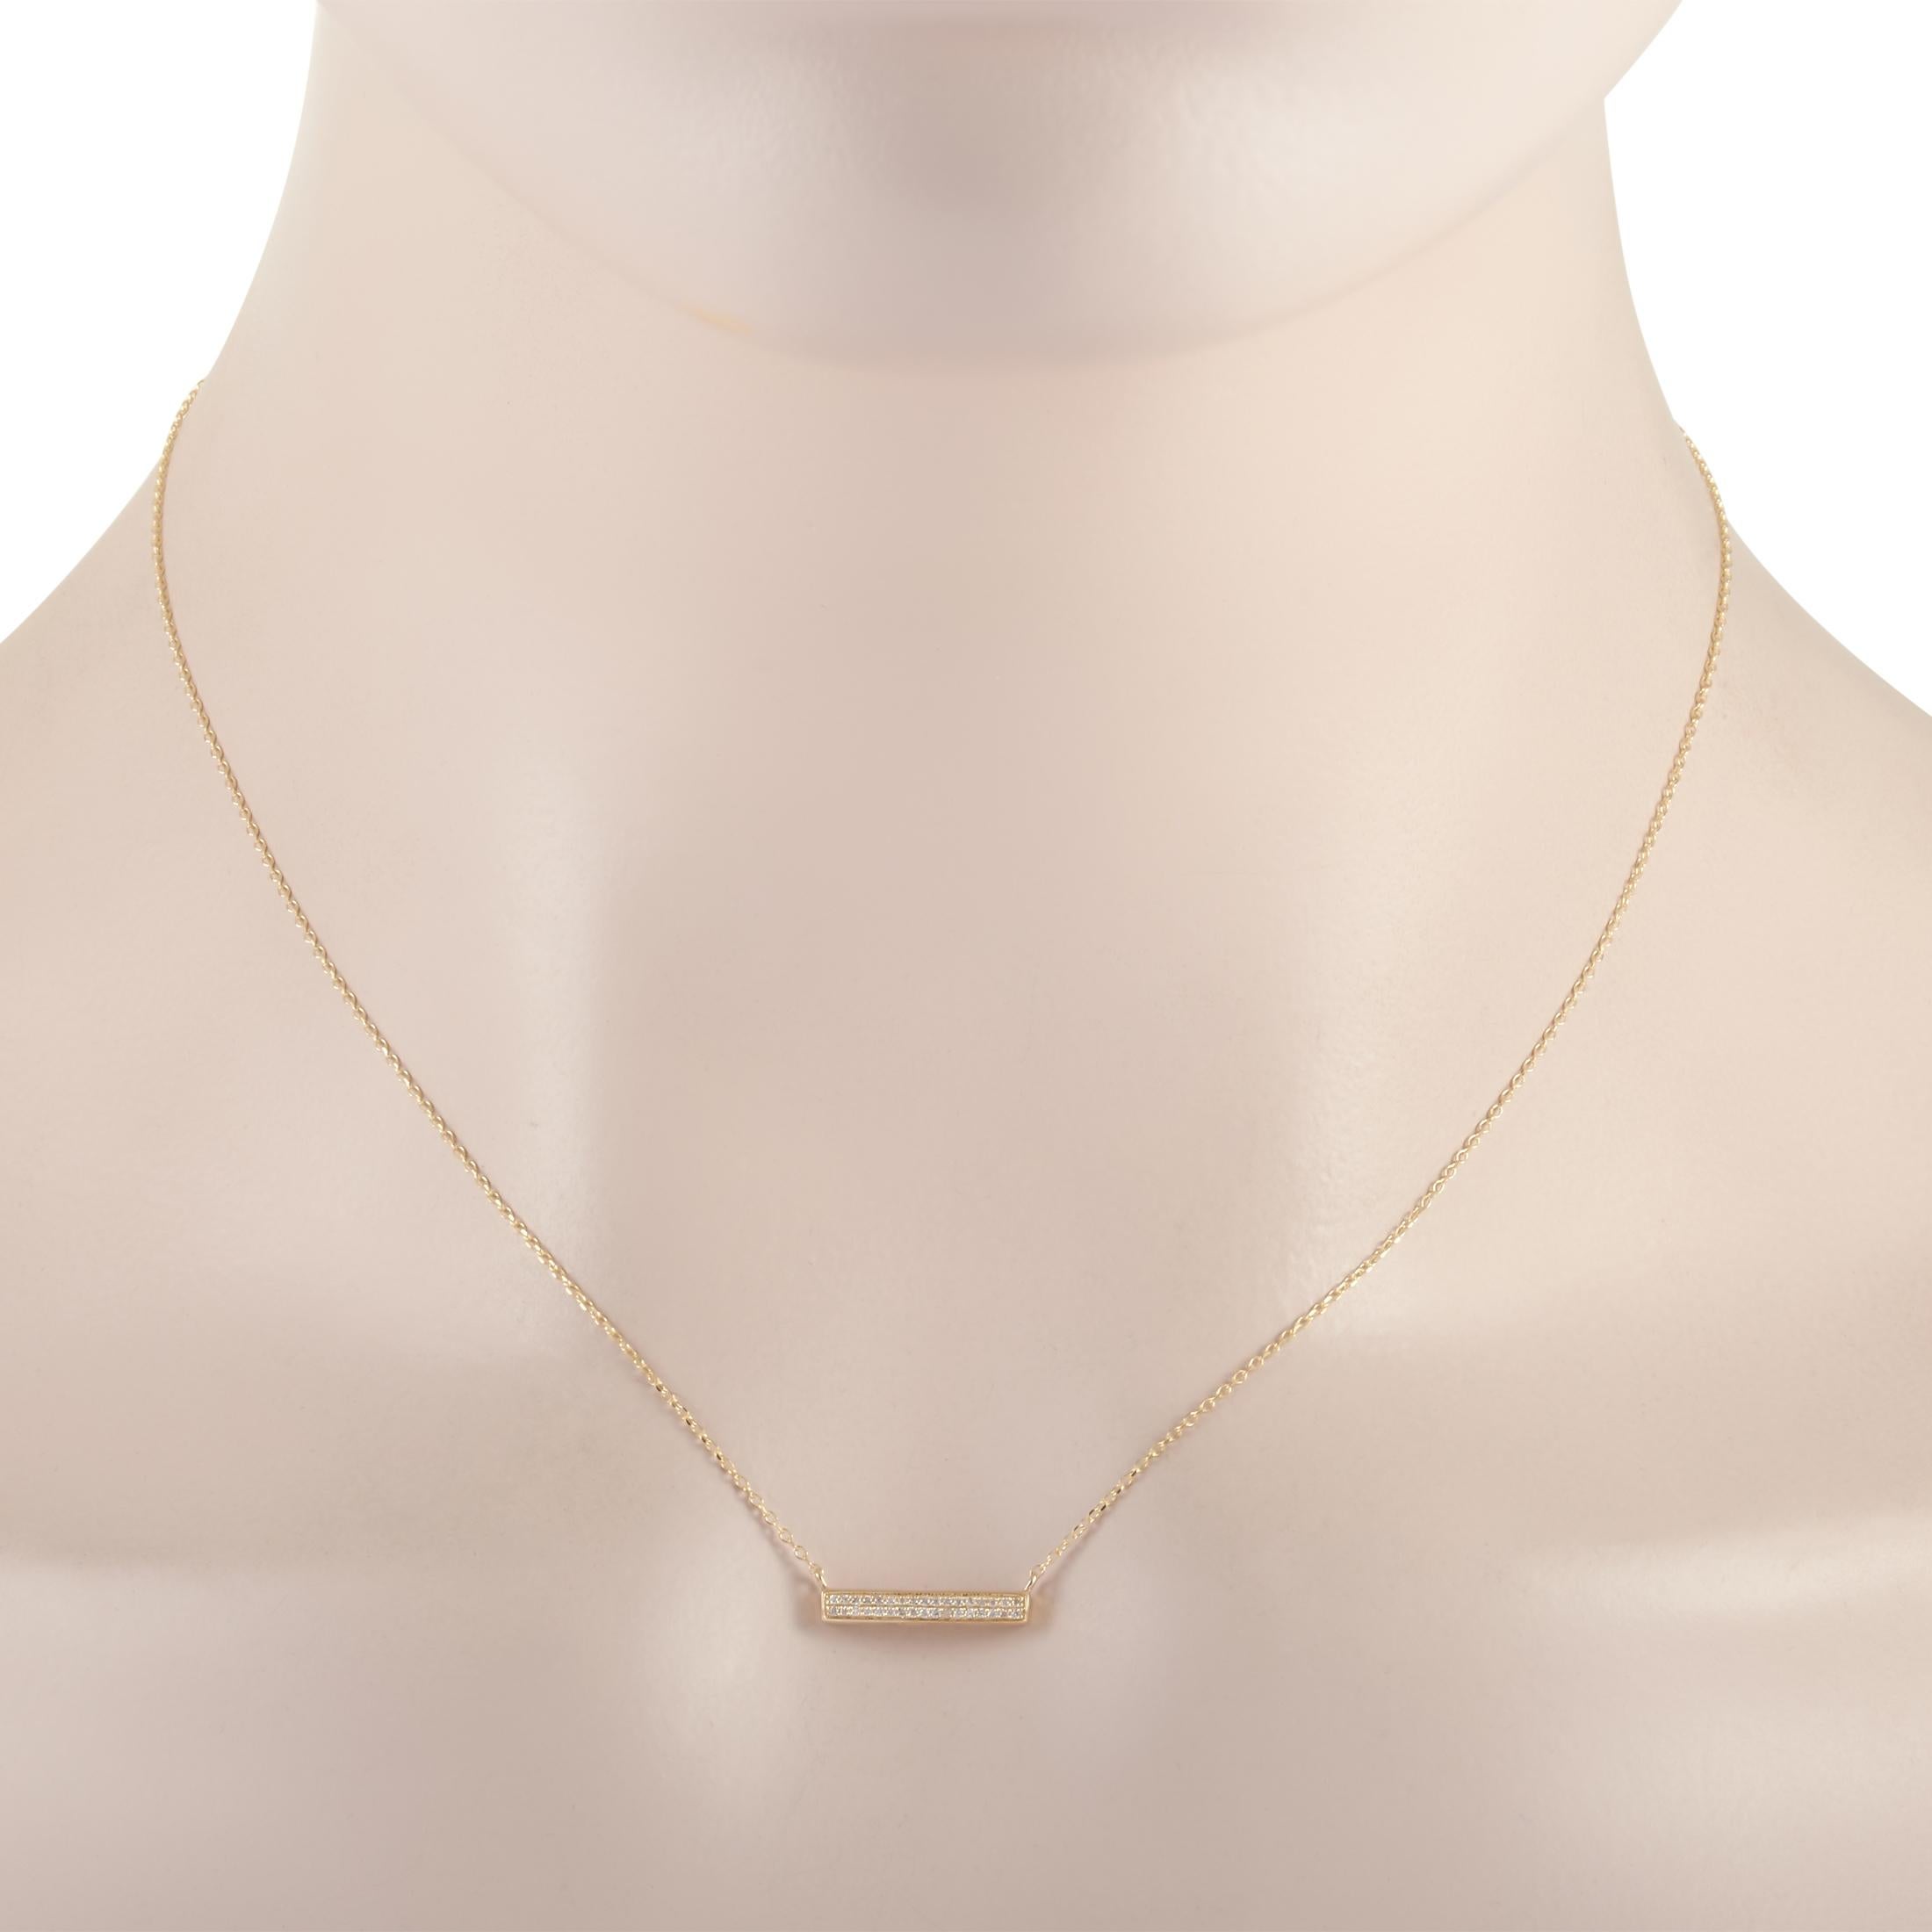 This LB Exclusive necklace is made of 14K yellow gold and embellished with diamonds that amount to 0.10 carats. The necklace weighs 1.5 grams and boasts a 15” chain and a pendant that measures 0.13” in length and 0.63” in width.
 
 Offered in brand